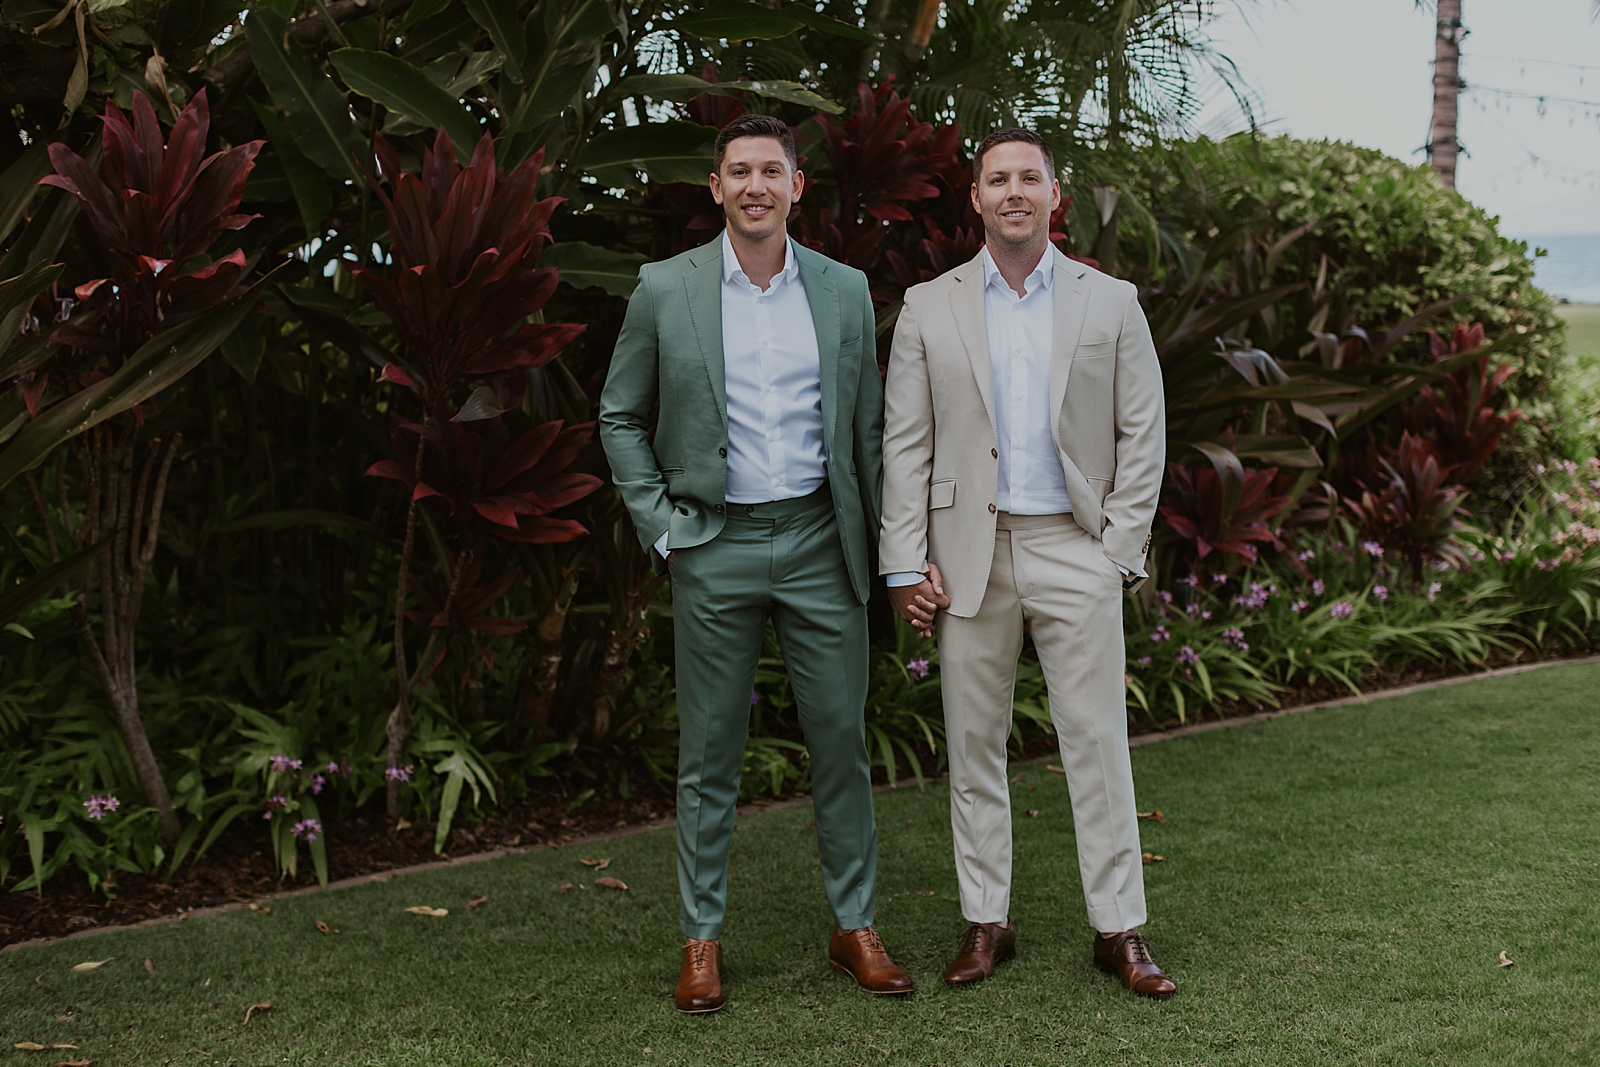 Grooms holding hands outside on green in front of tropical plants